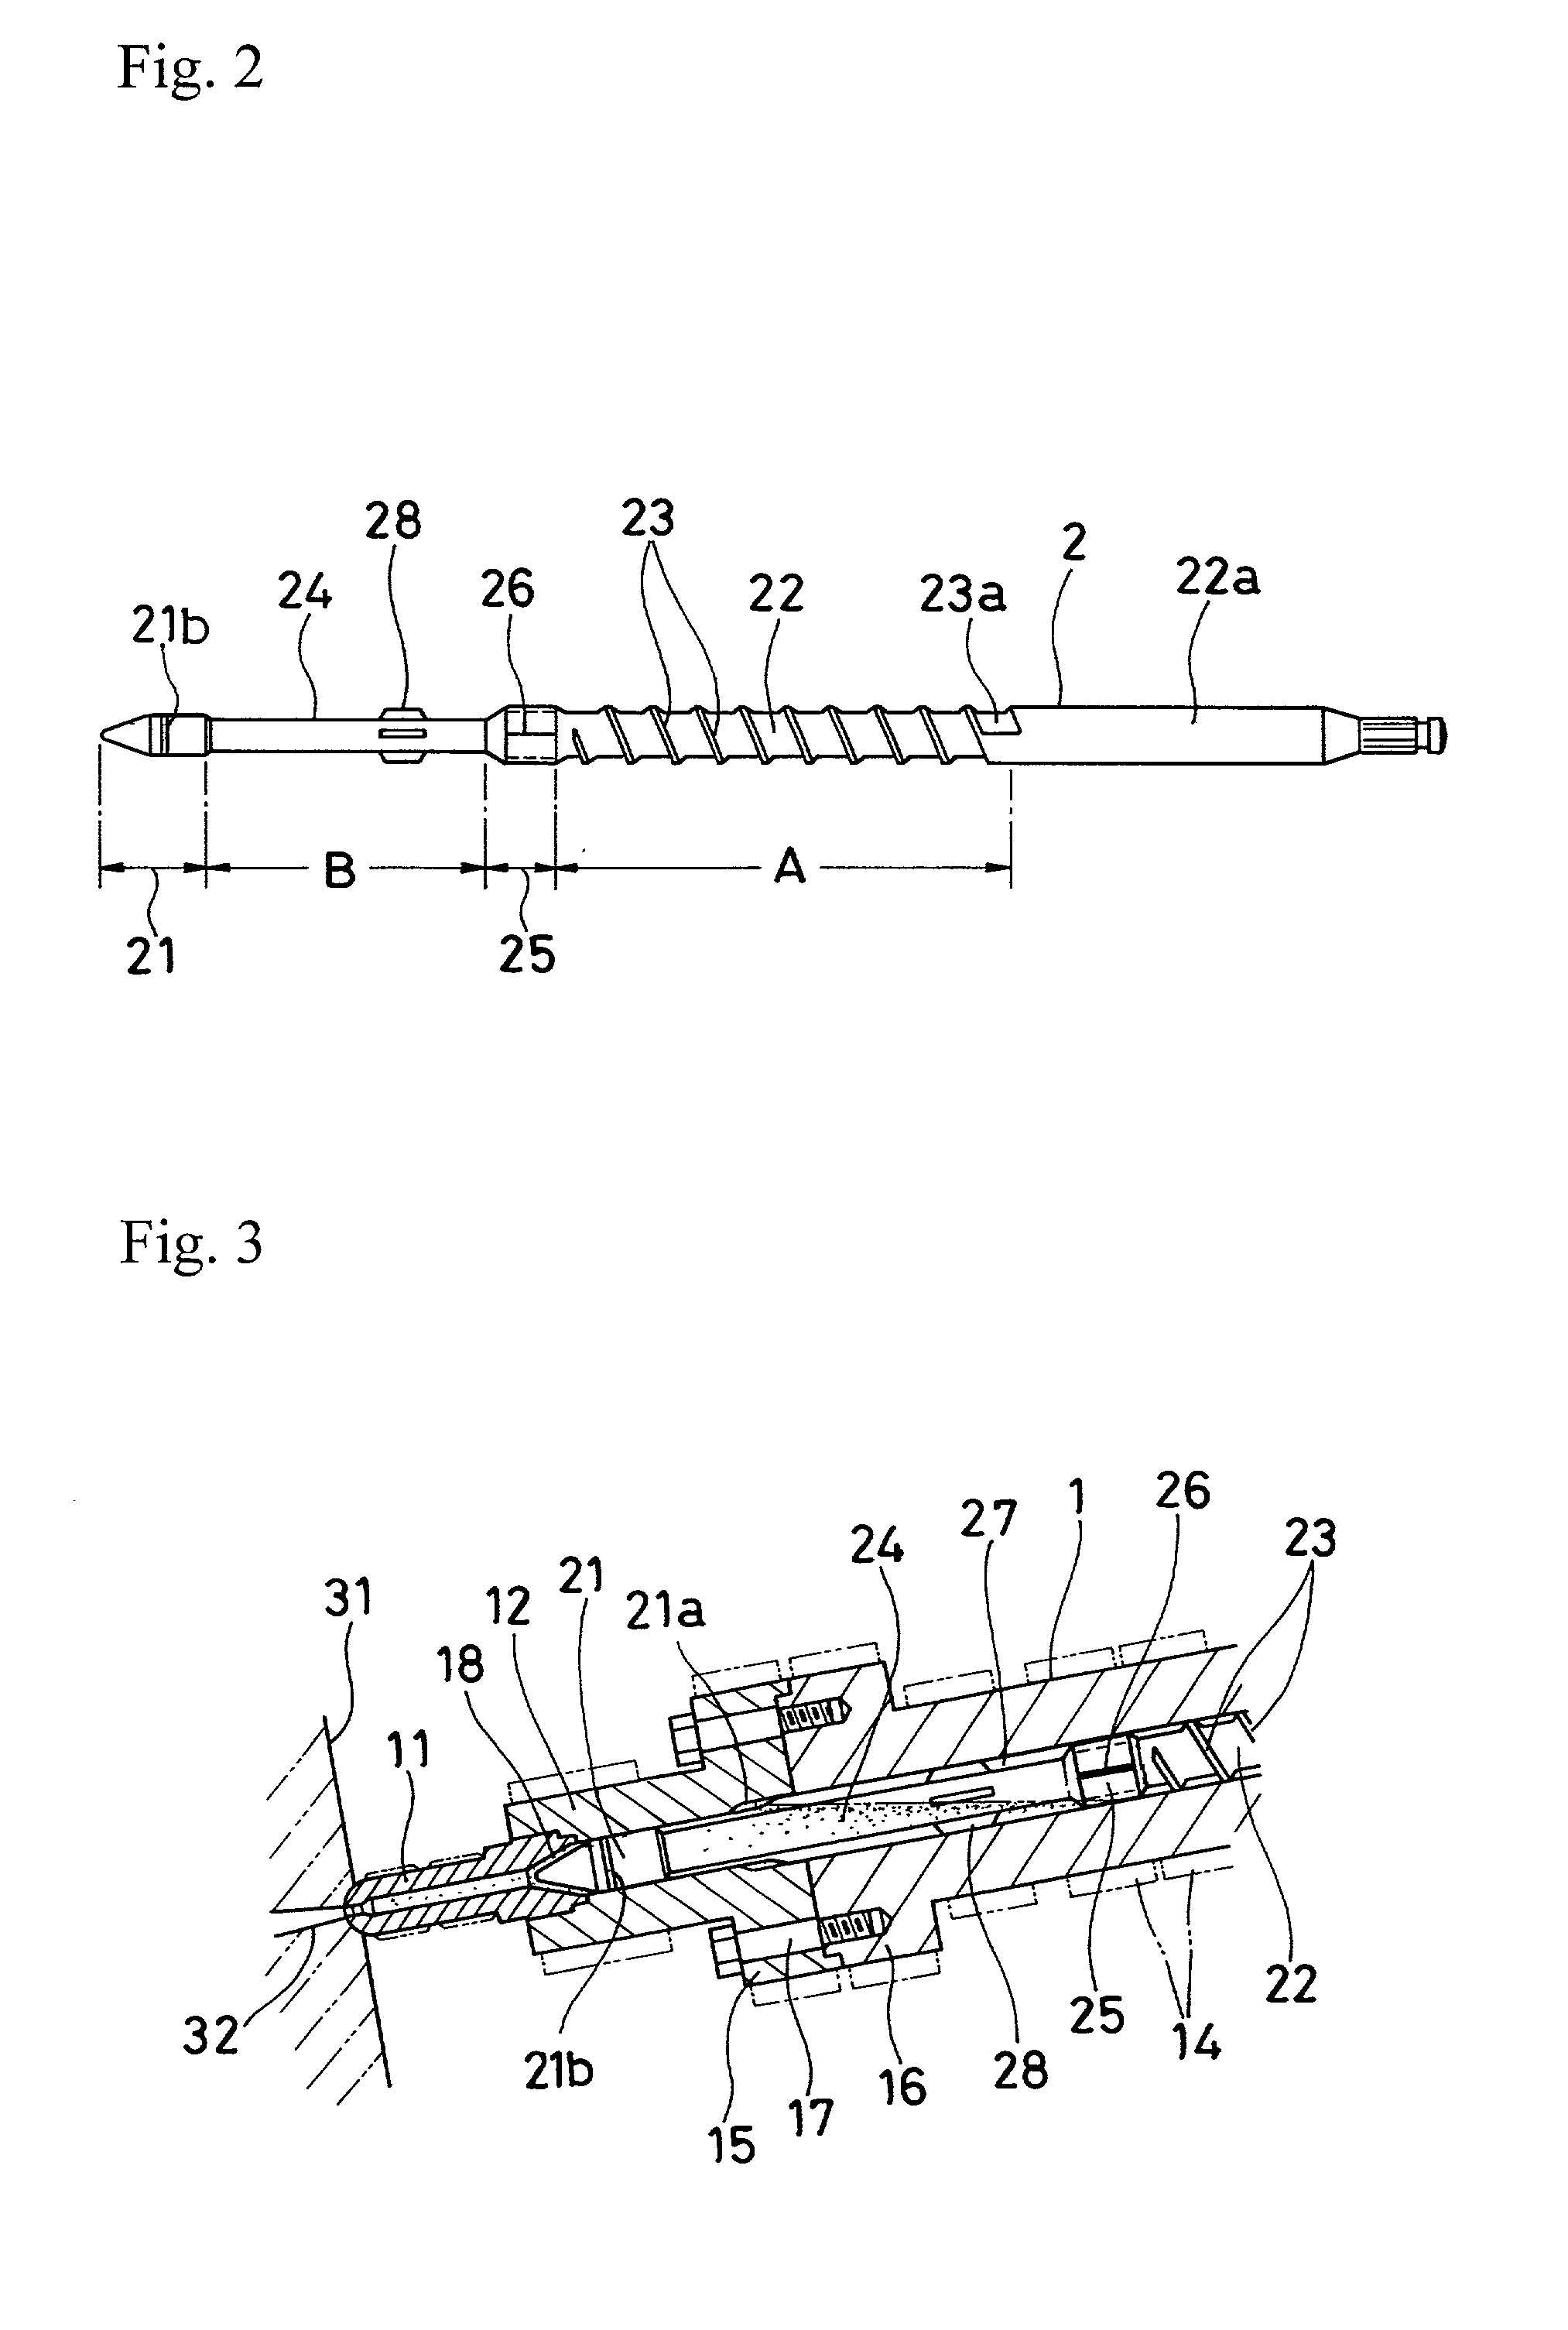 Injection apparatus for melted metals